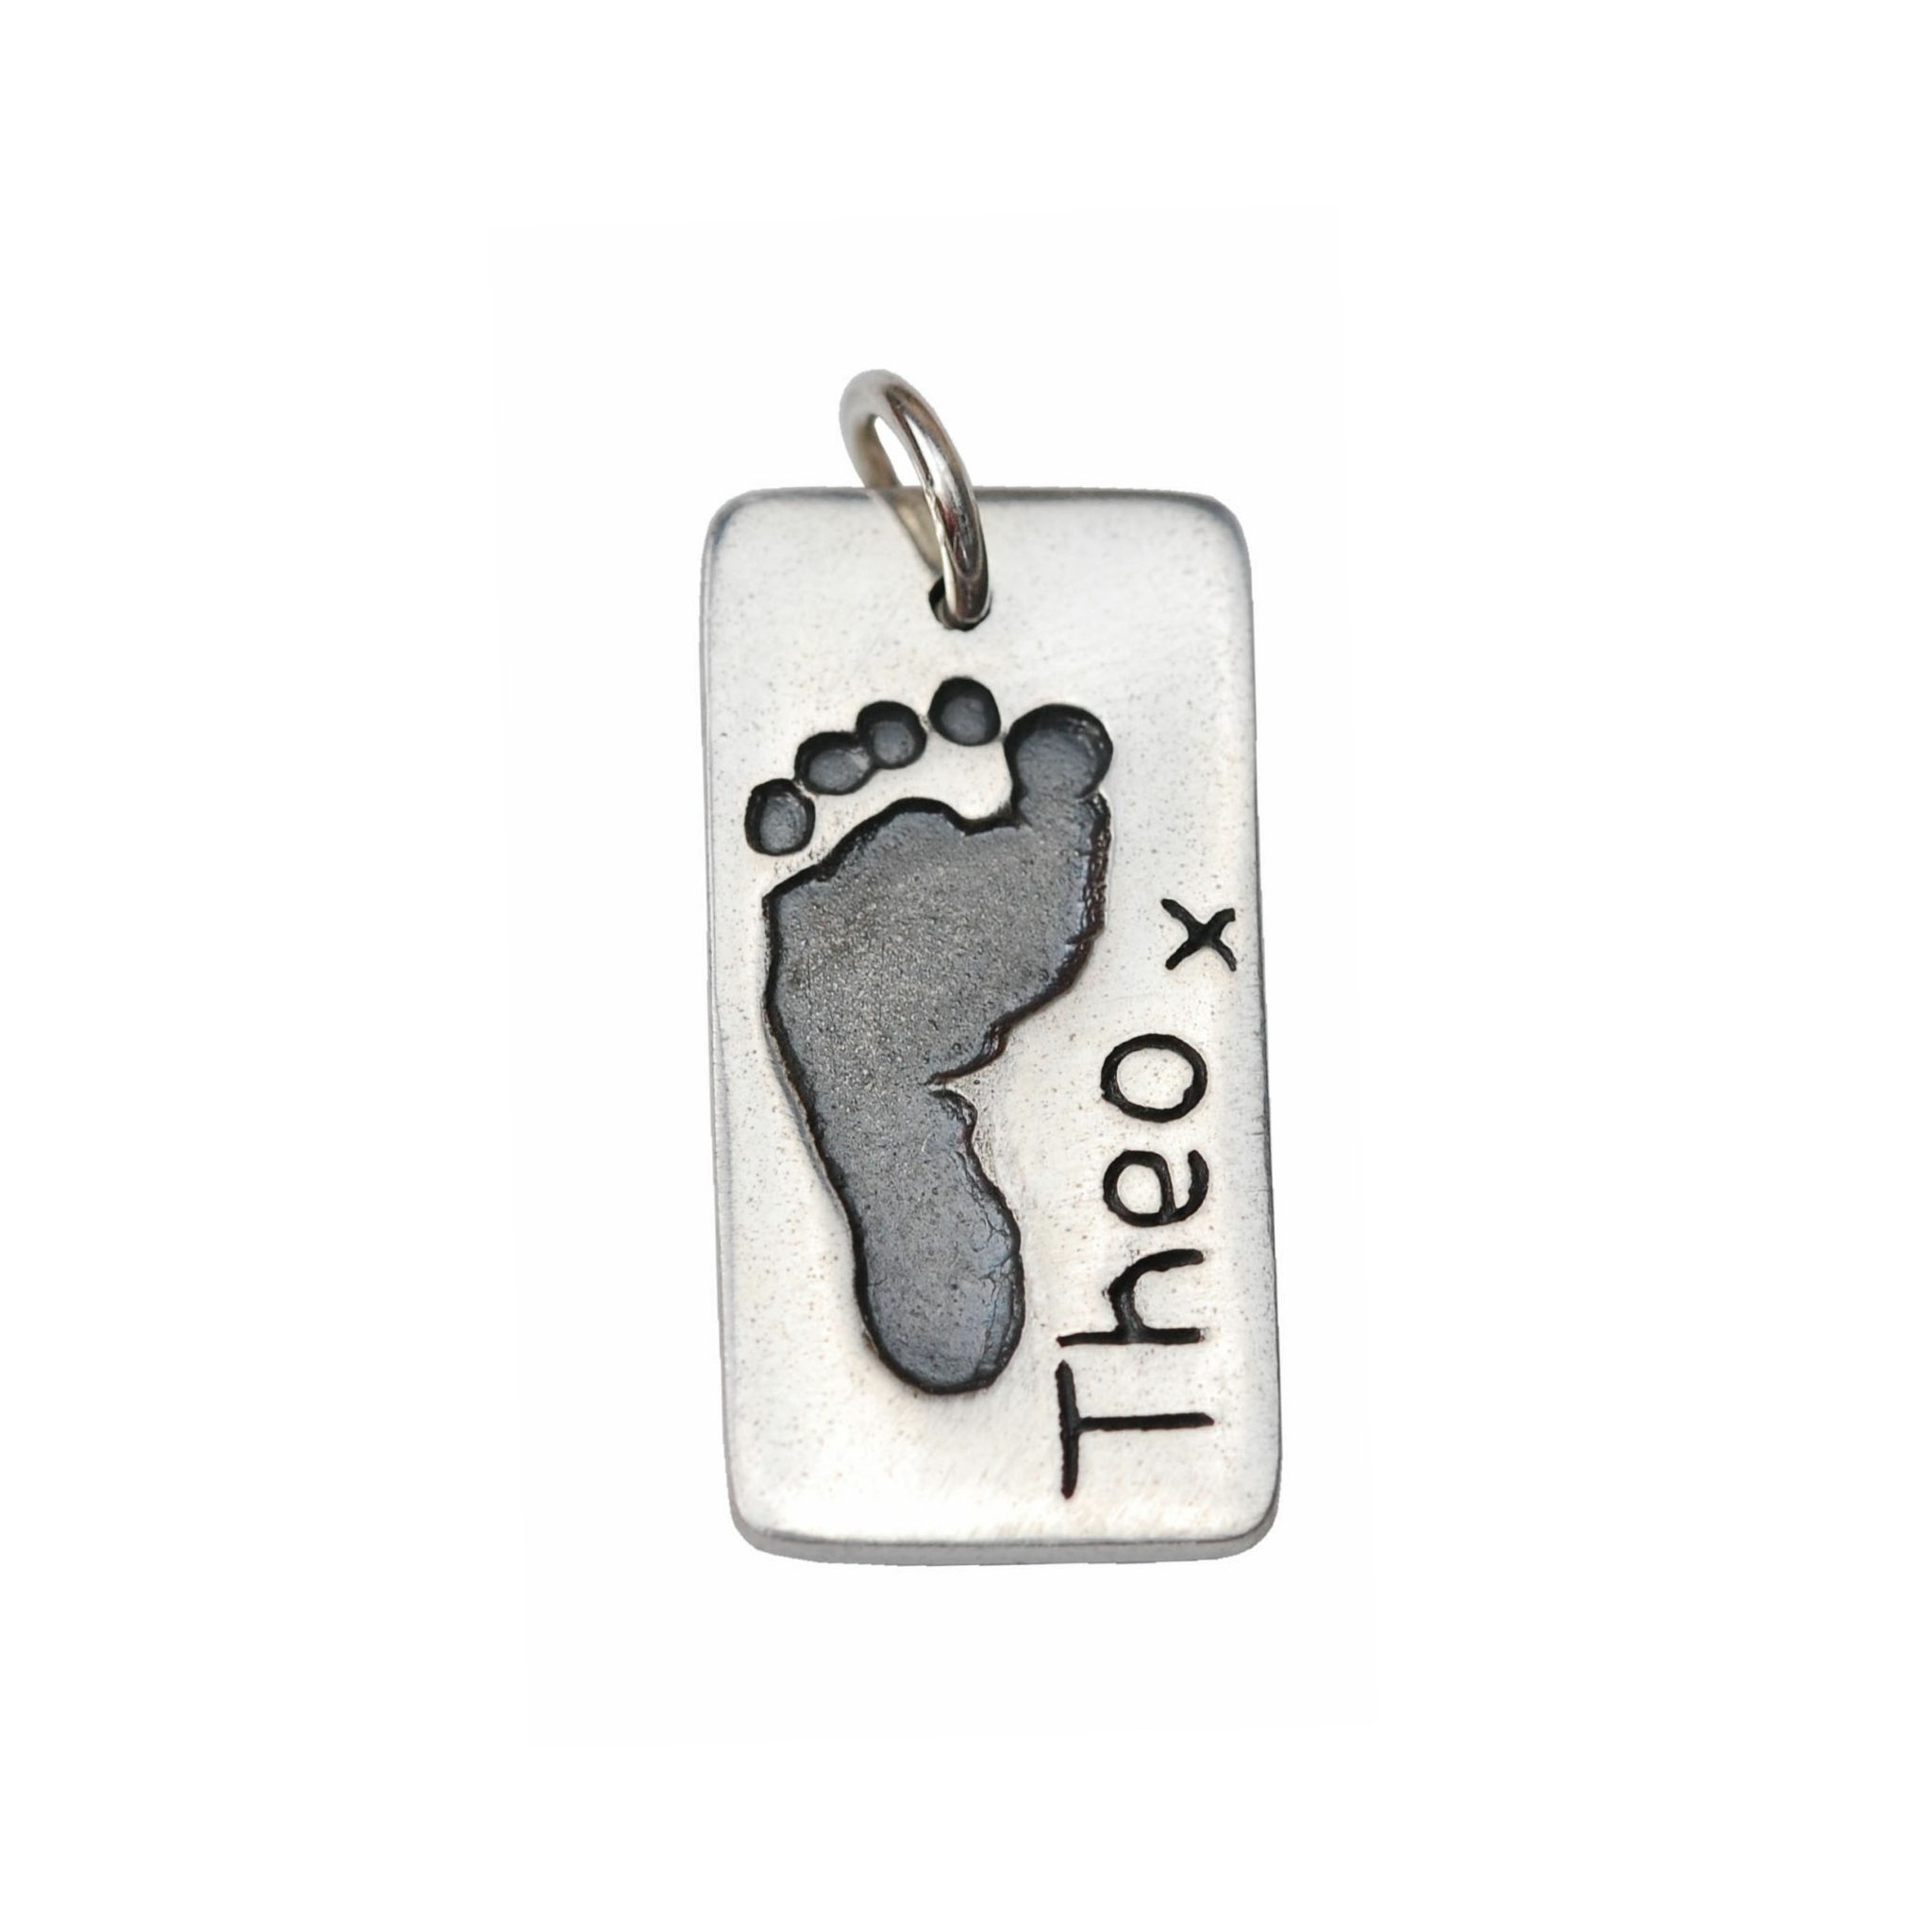 Silver rectangle charm with footprint